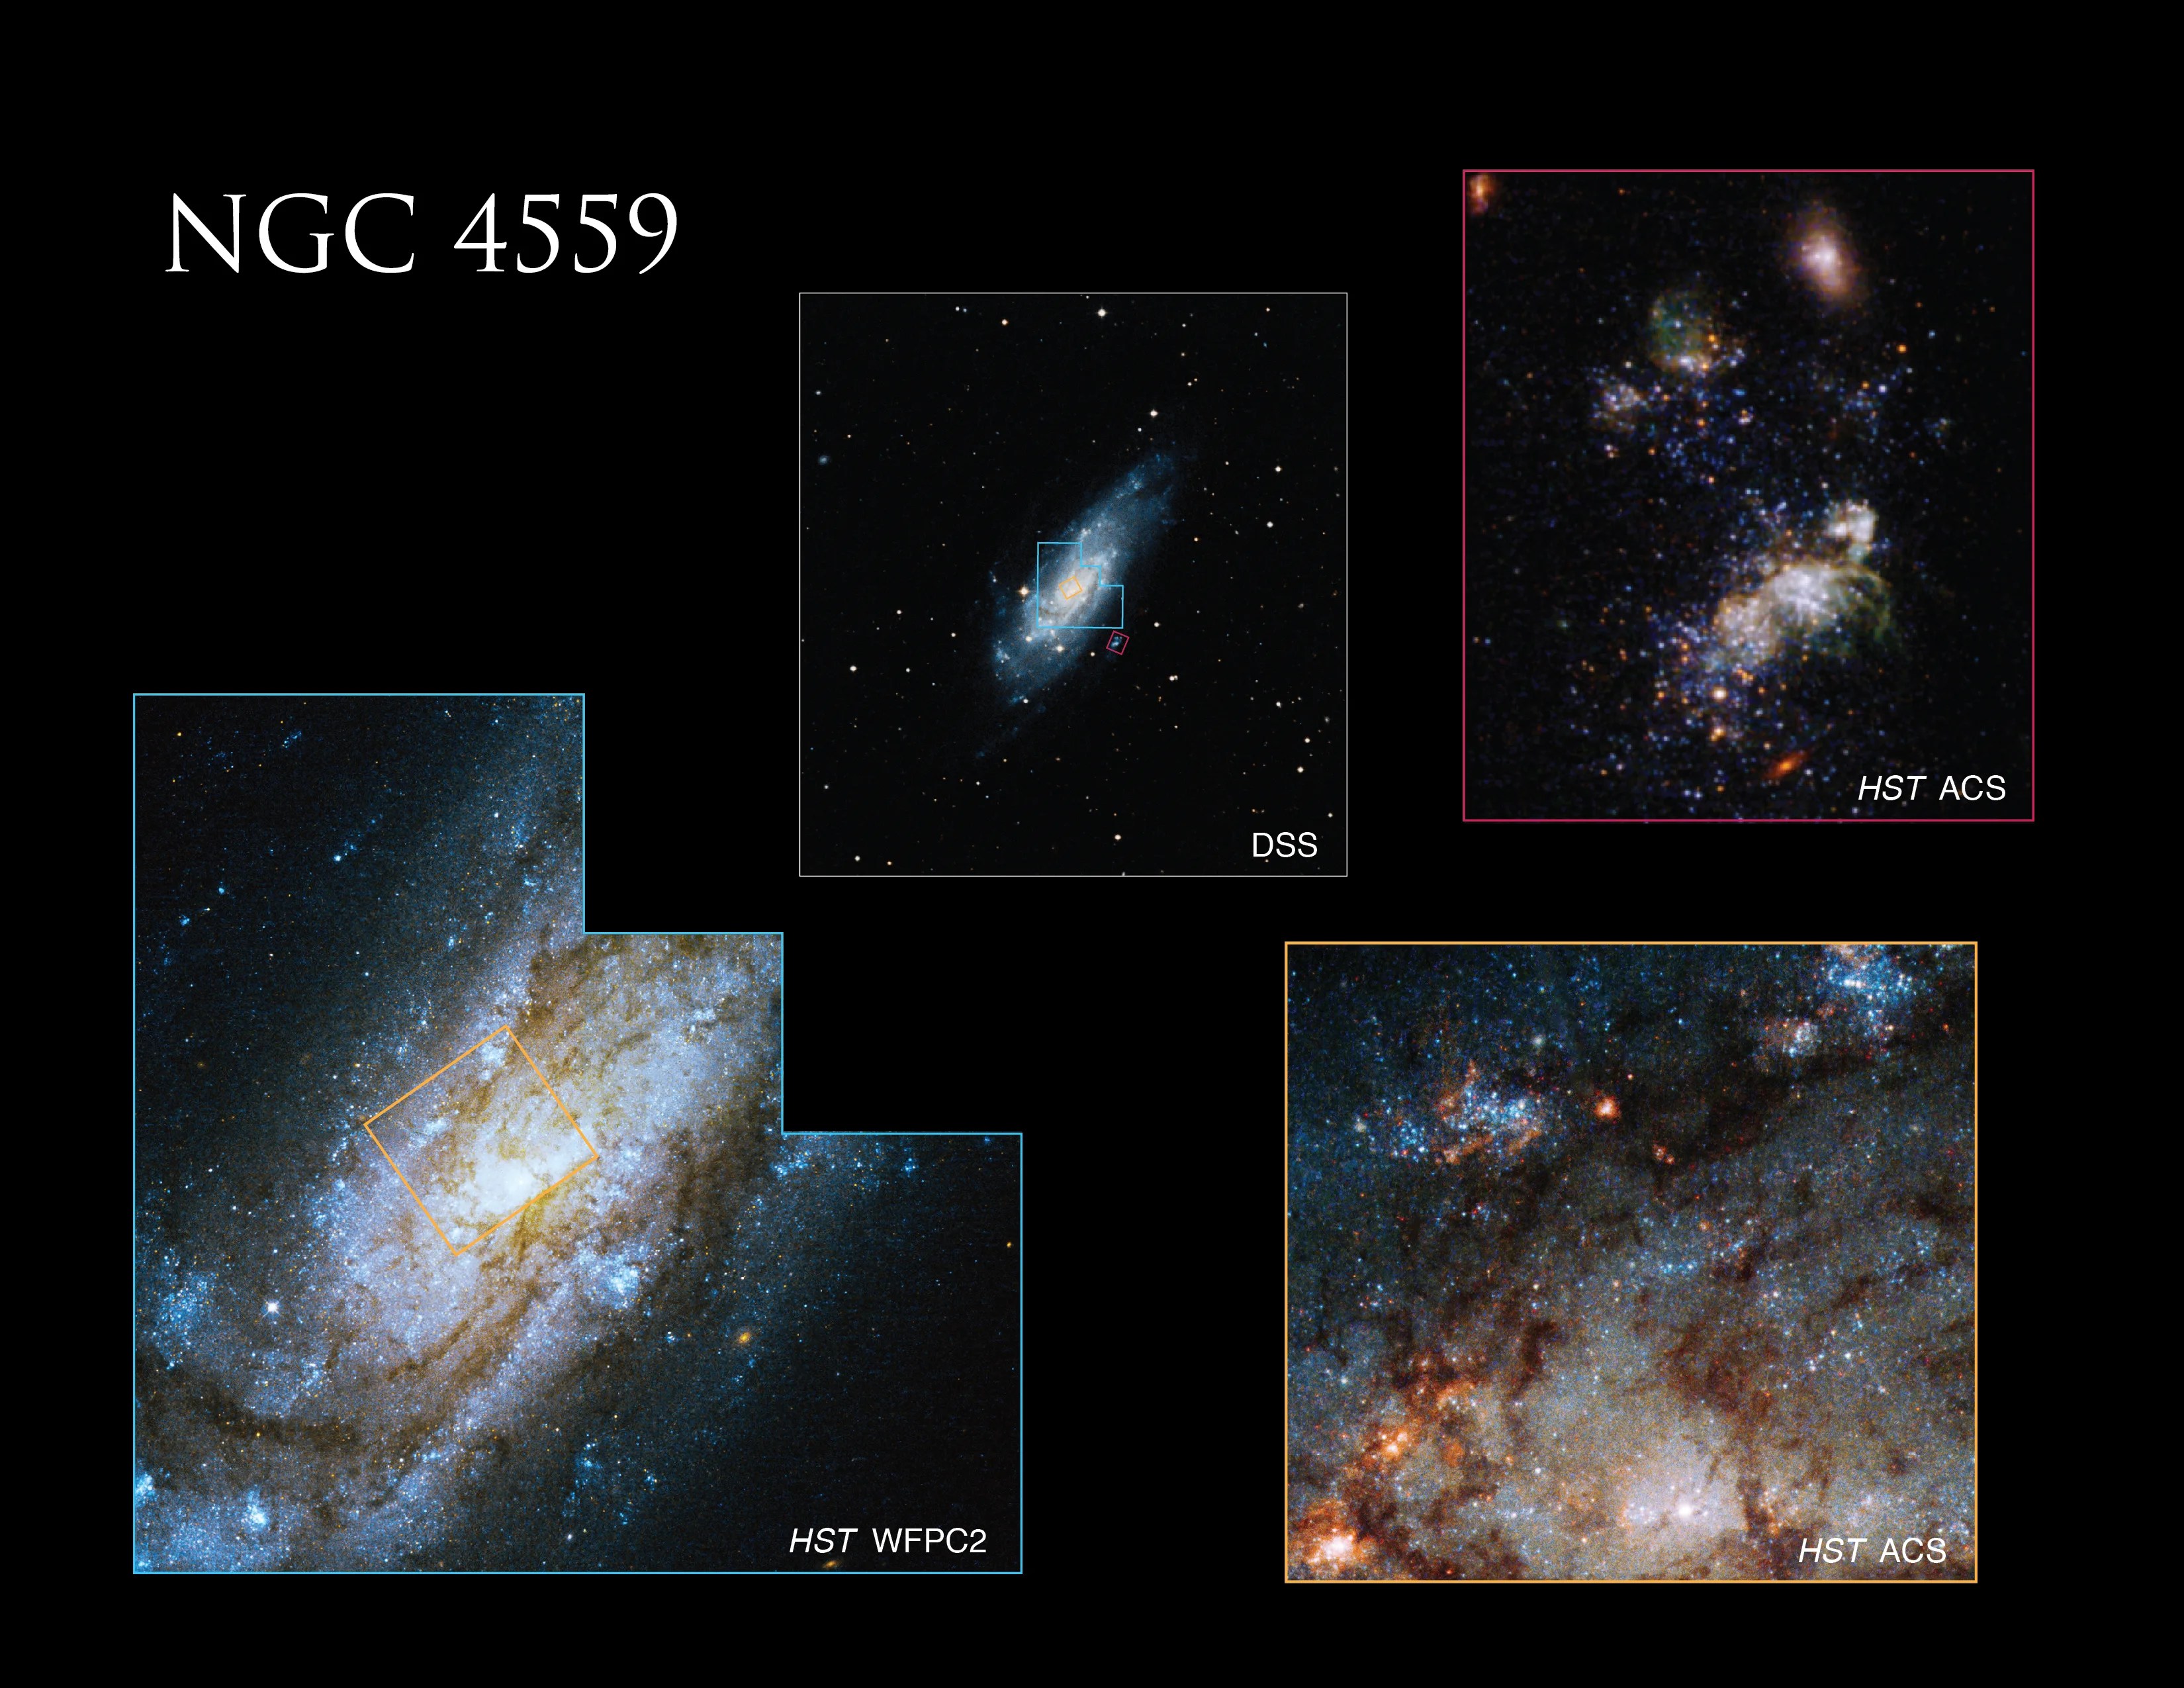 At top center, a ground-based image of Caldwell 36 (NGC 4559) from the Digitized Sky Survey (DSS) includes colored boxes showing some of the areas targeted by Hubble. The image at bottom left, taken by Hubble’s Wide Field and Planetary Camera 2 (WFPC2), shows the core of the galaxy. In the WFPC2 image, a smaller, orange square defines the area covered in an even closer view of the galaxy’s core taken by Hubble’s Advanced Camera for Surveys (ACS), shown in the bottom right. The image at top right, also taken by ACS, features a large star-forming complex in the outskirts of the galaxy, as well as a dwarf galaxy (the fuzzy, reddish object near the top) that might be an orbiting companion of Caldwell 36. All the Hubble images include visible and infrared light.